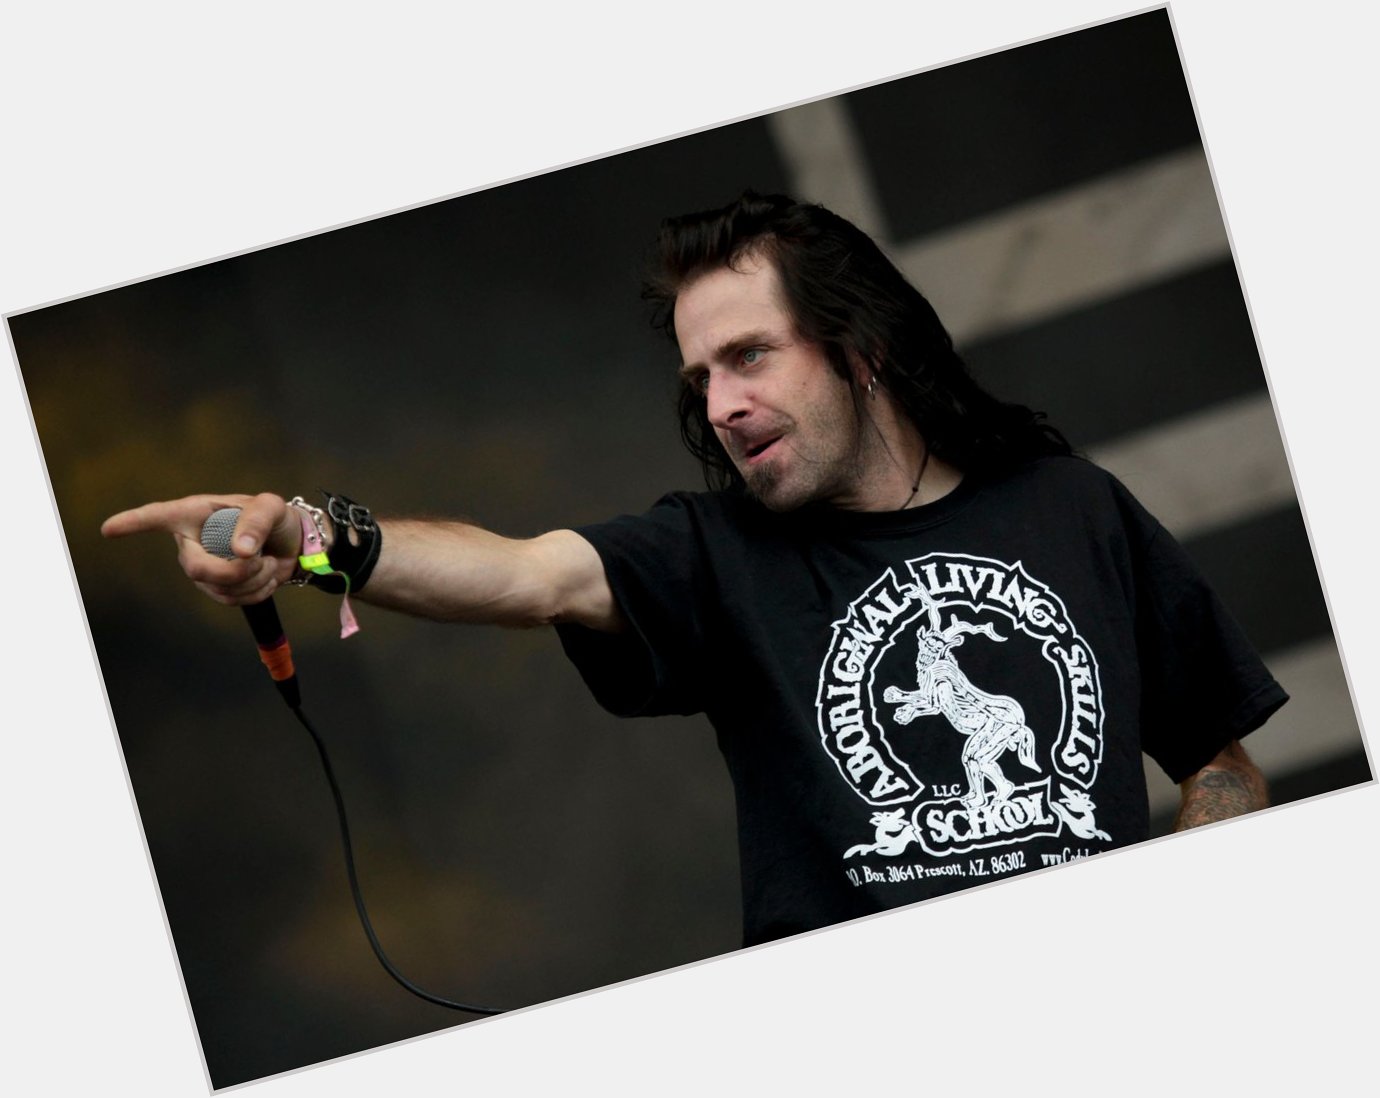 Please join me here at in wishing the one and only Randy Blythe a very Happy 50th Birthday today  